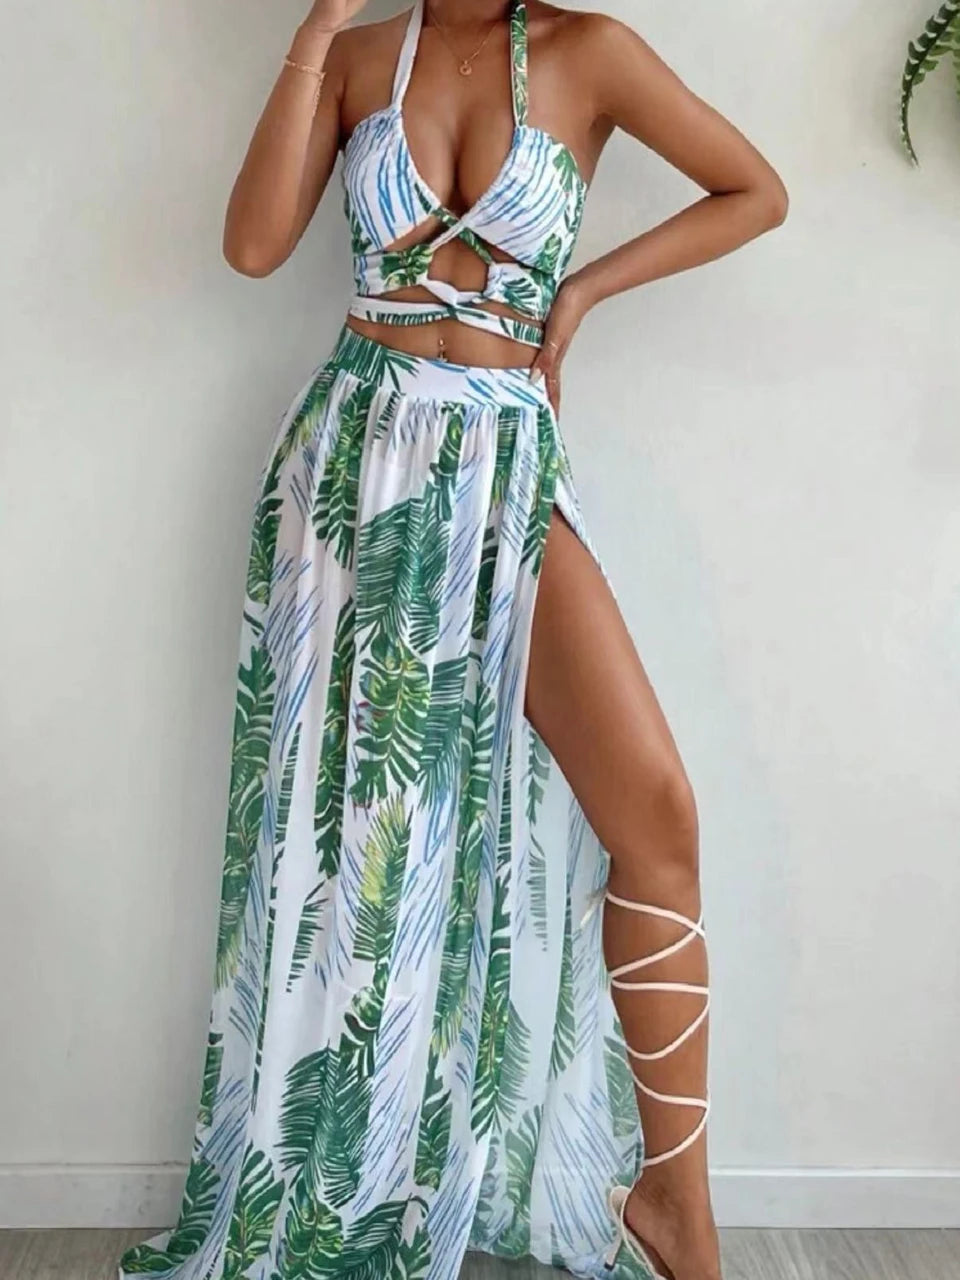 Bahamas Vacation 3 Piece Cover Up Skirt Set  Sunset and Swim White L 